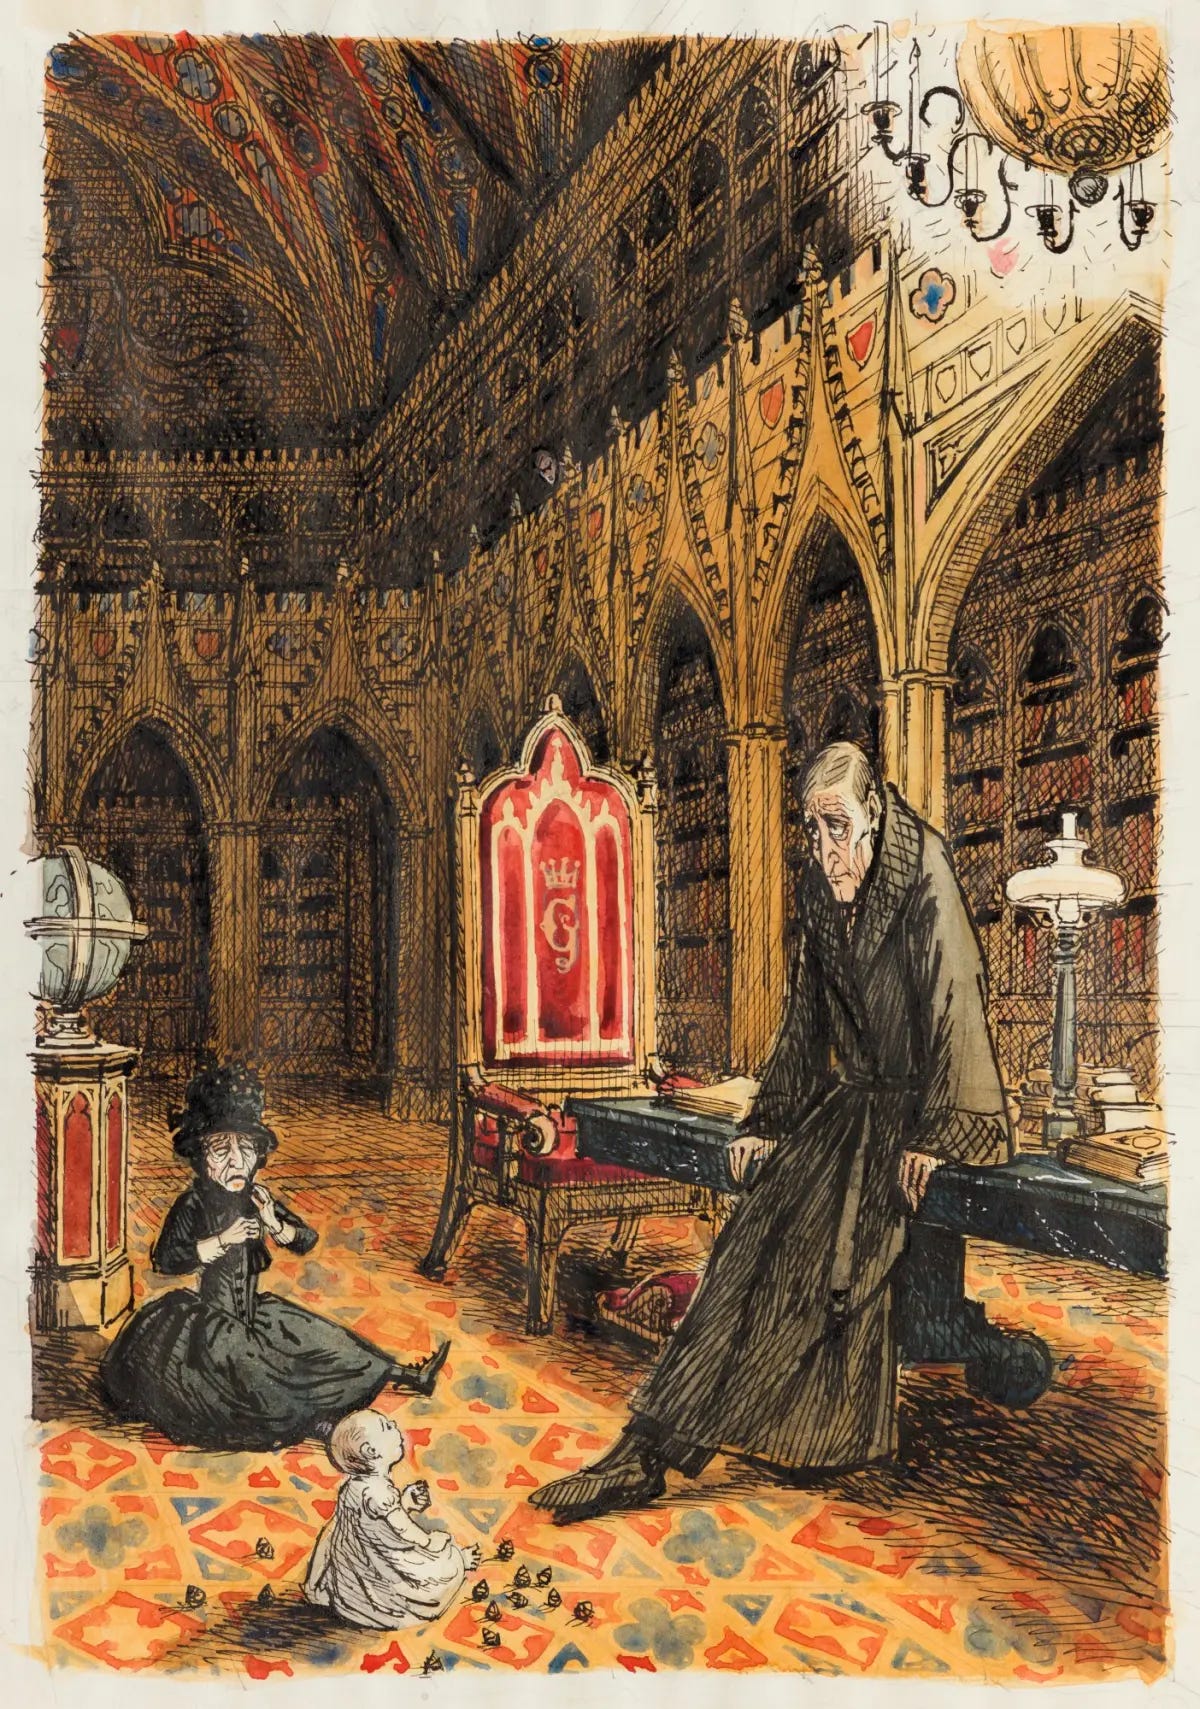 The Library of Gormenghast, with Sepulchrave, Nannie Slagg and Titus Groan